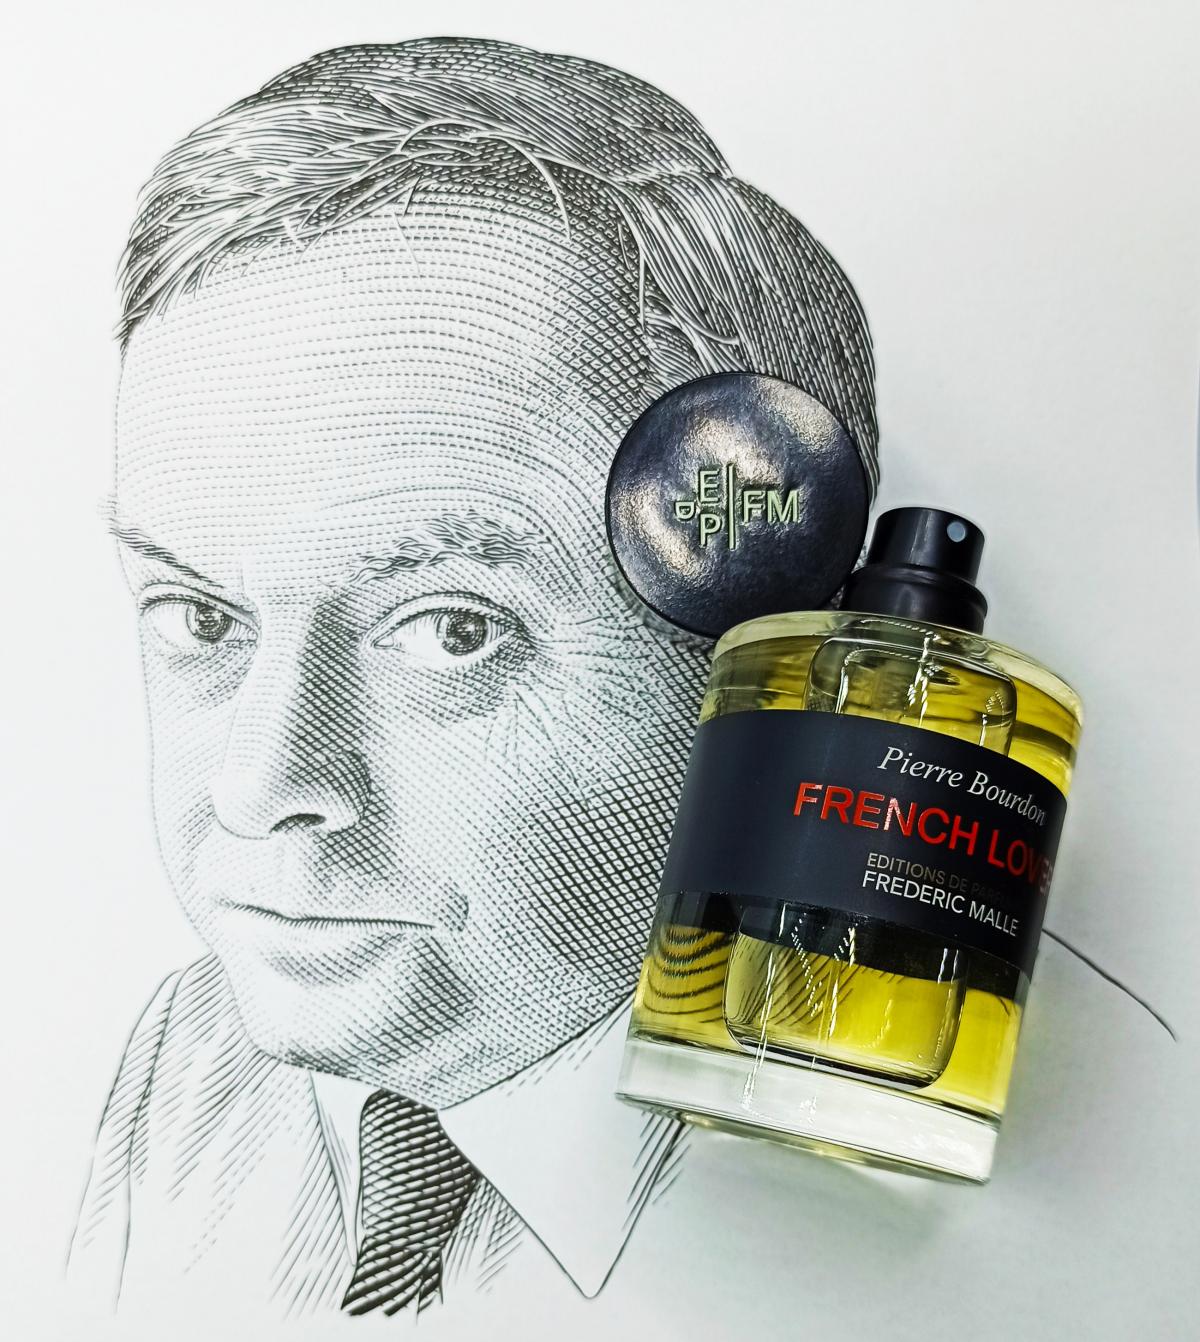 frederic malle french lover